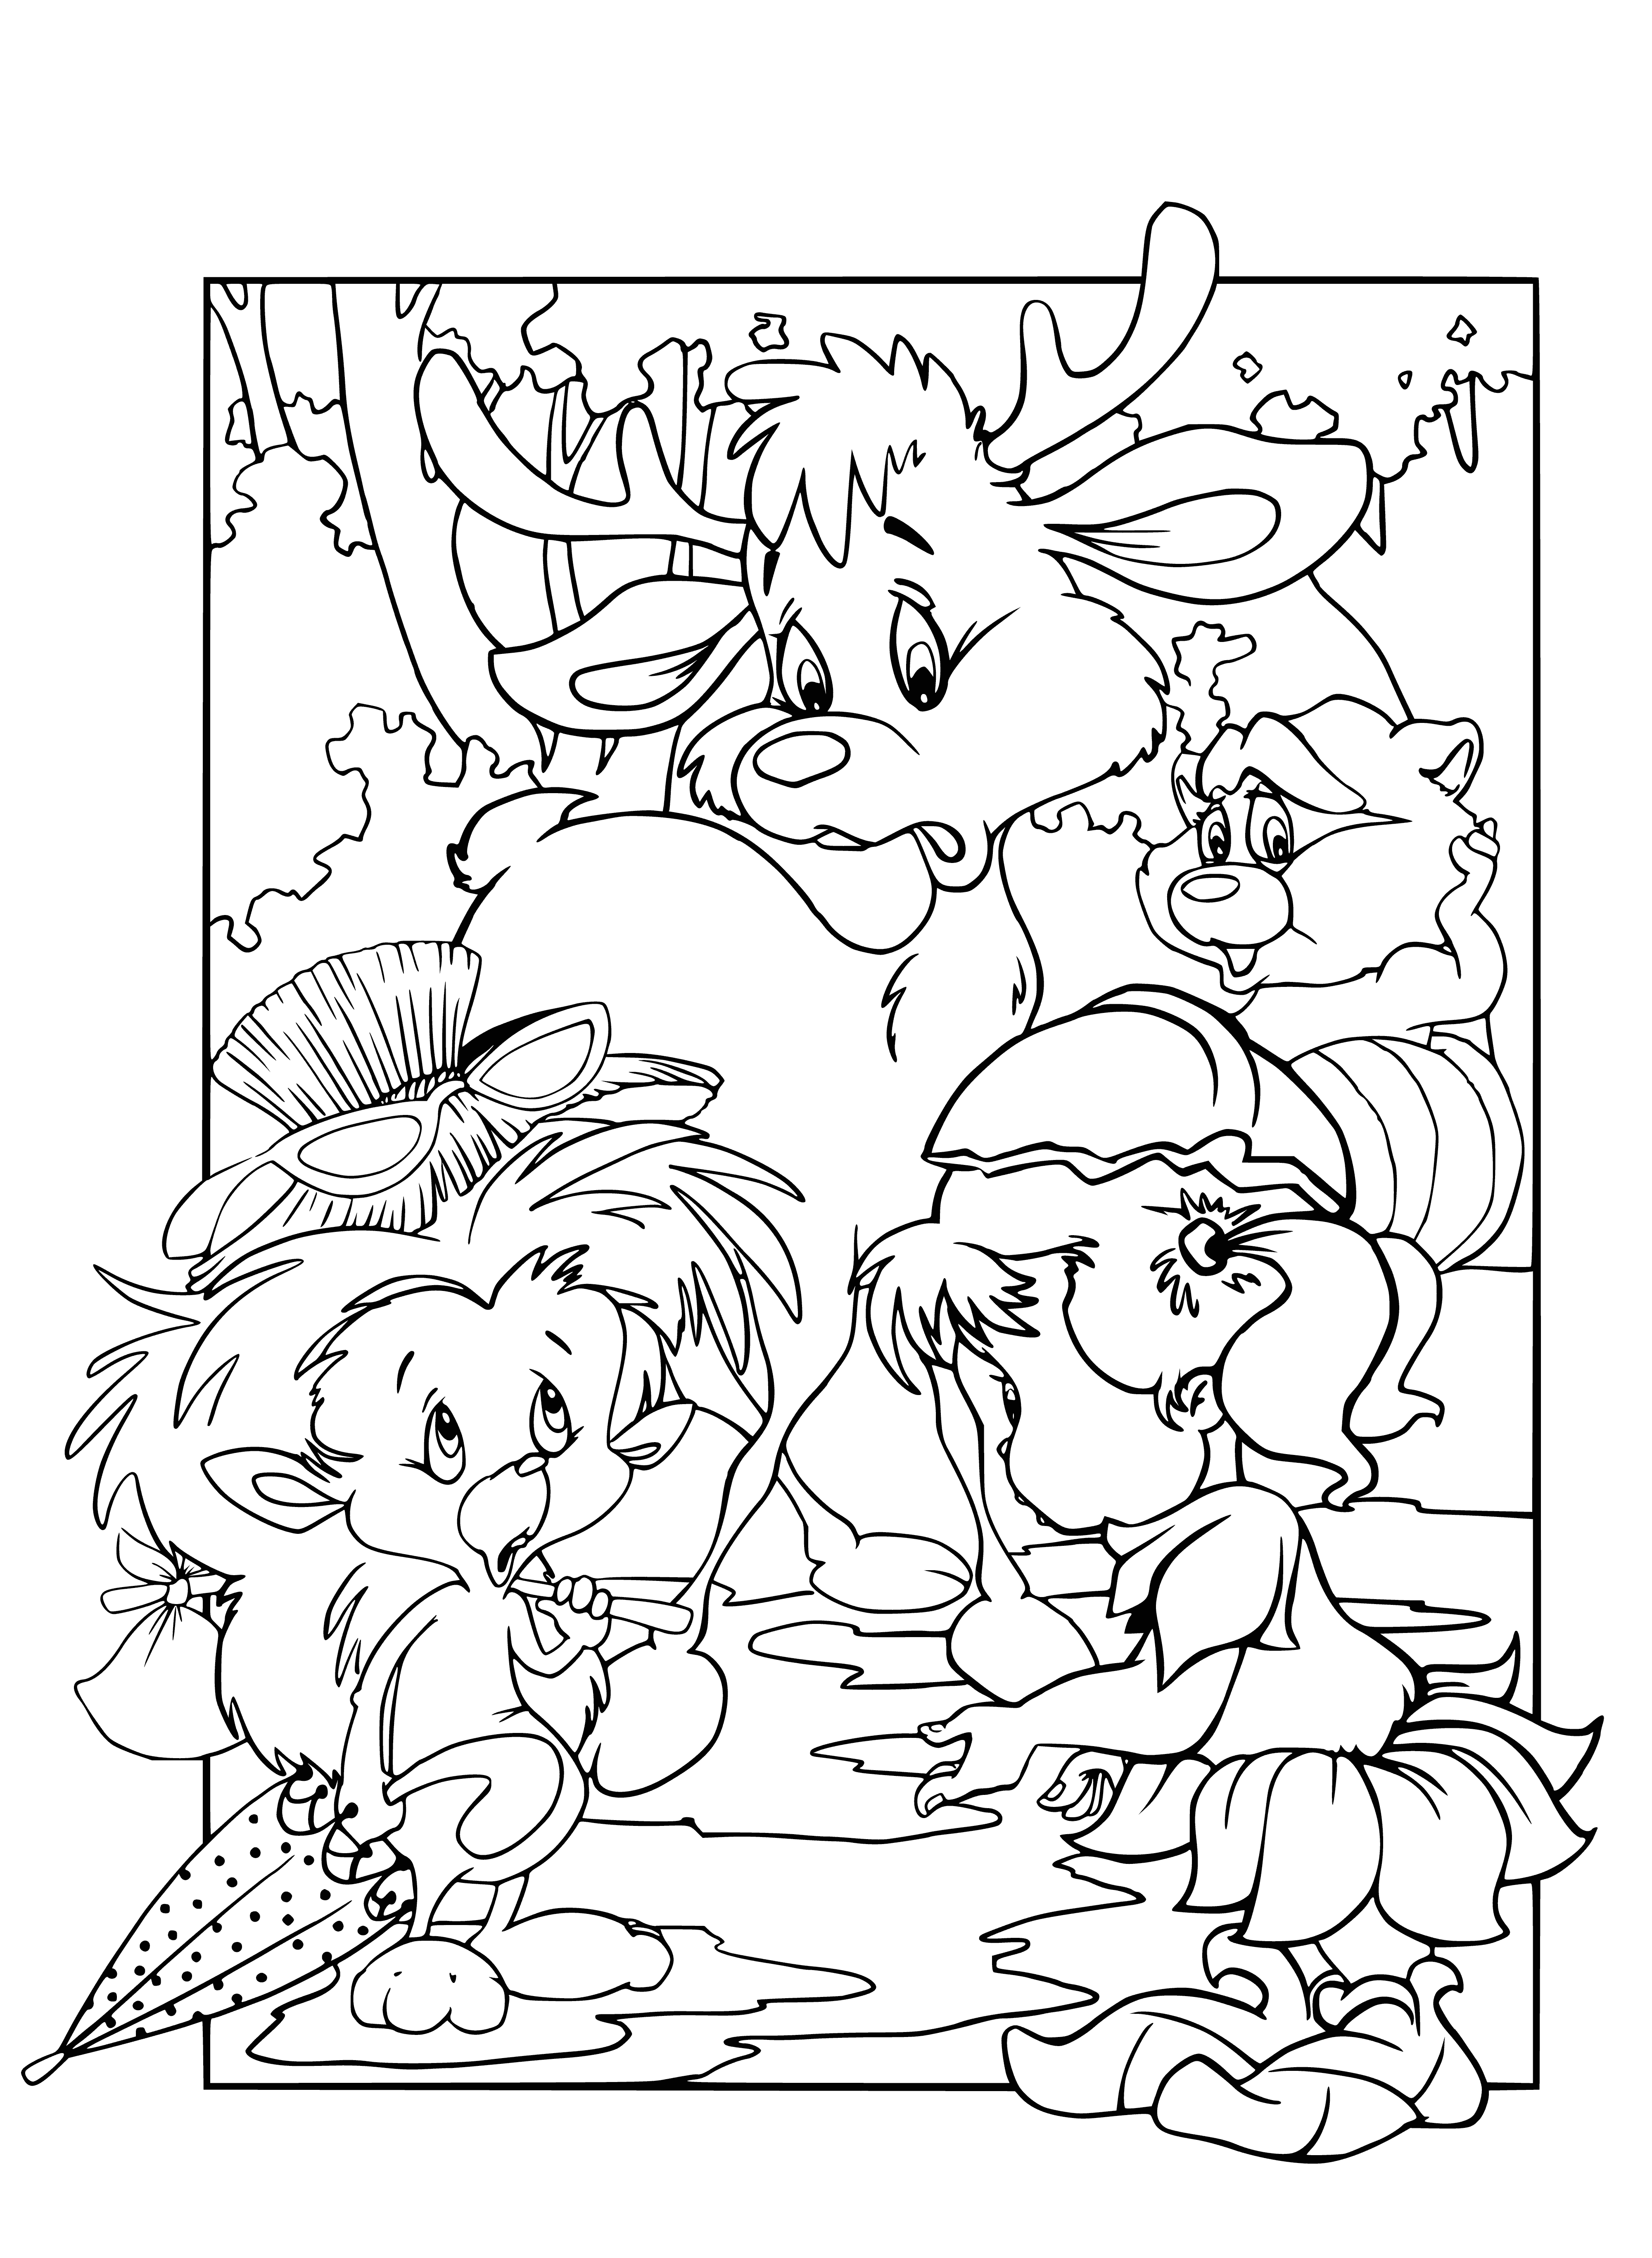 coloring page: Girl and pet hedgehog standing in the rain, happy despite the wet weather. #rainyDay #happyThoughts